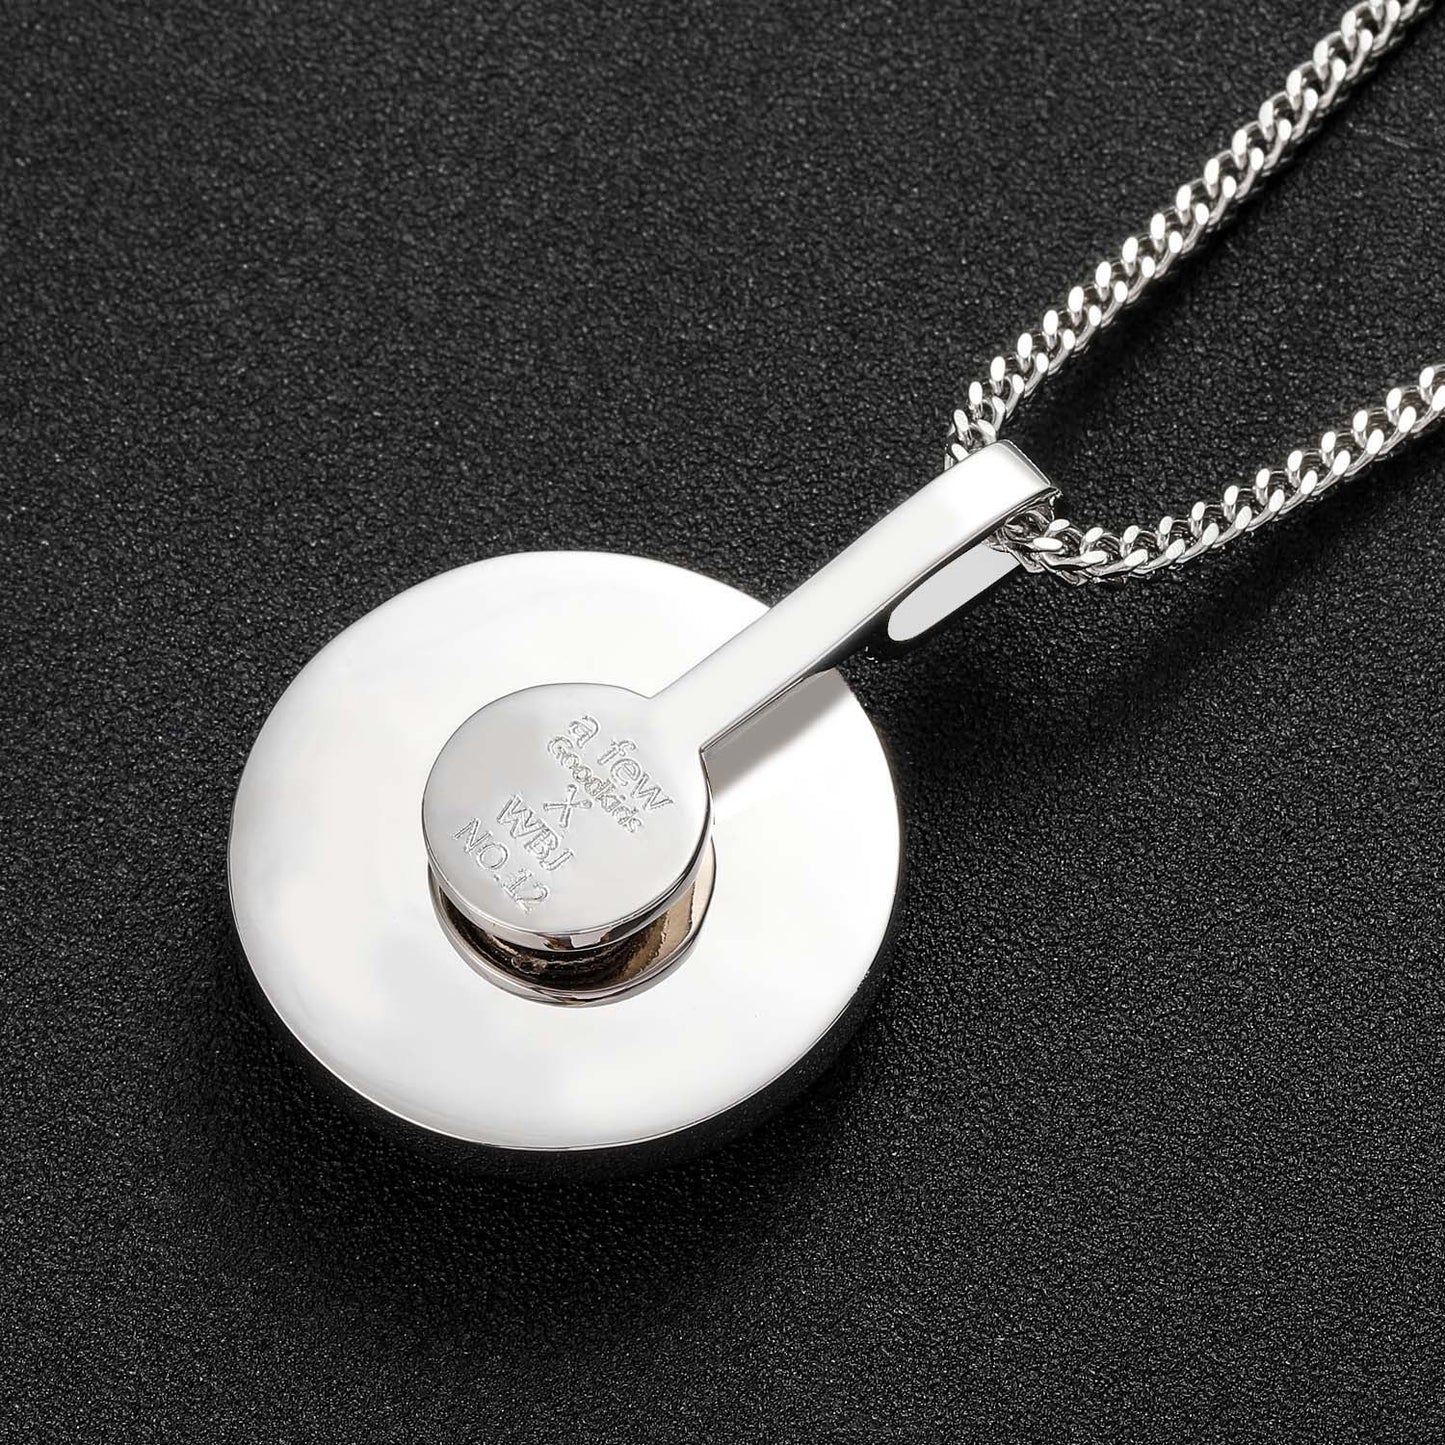 Hiphop Necklace Male AFGK Rotatable Earth Pendant Men Hip-hop Trendy Brand Hanging Jewelry